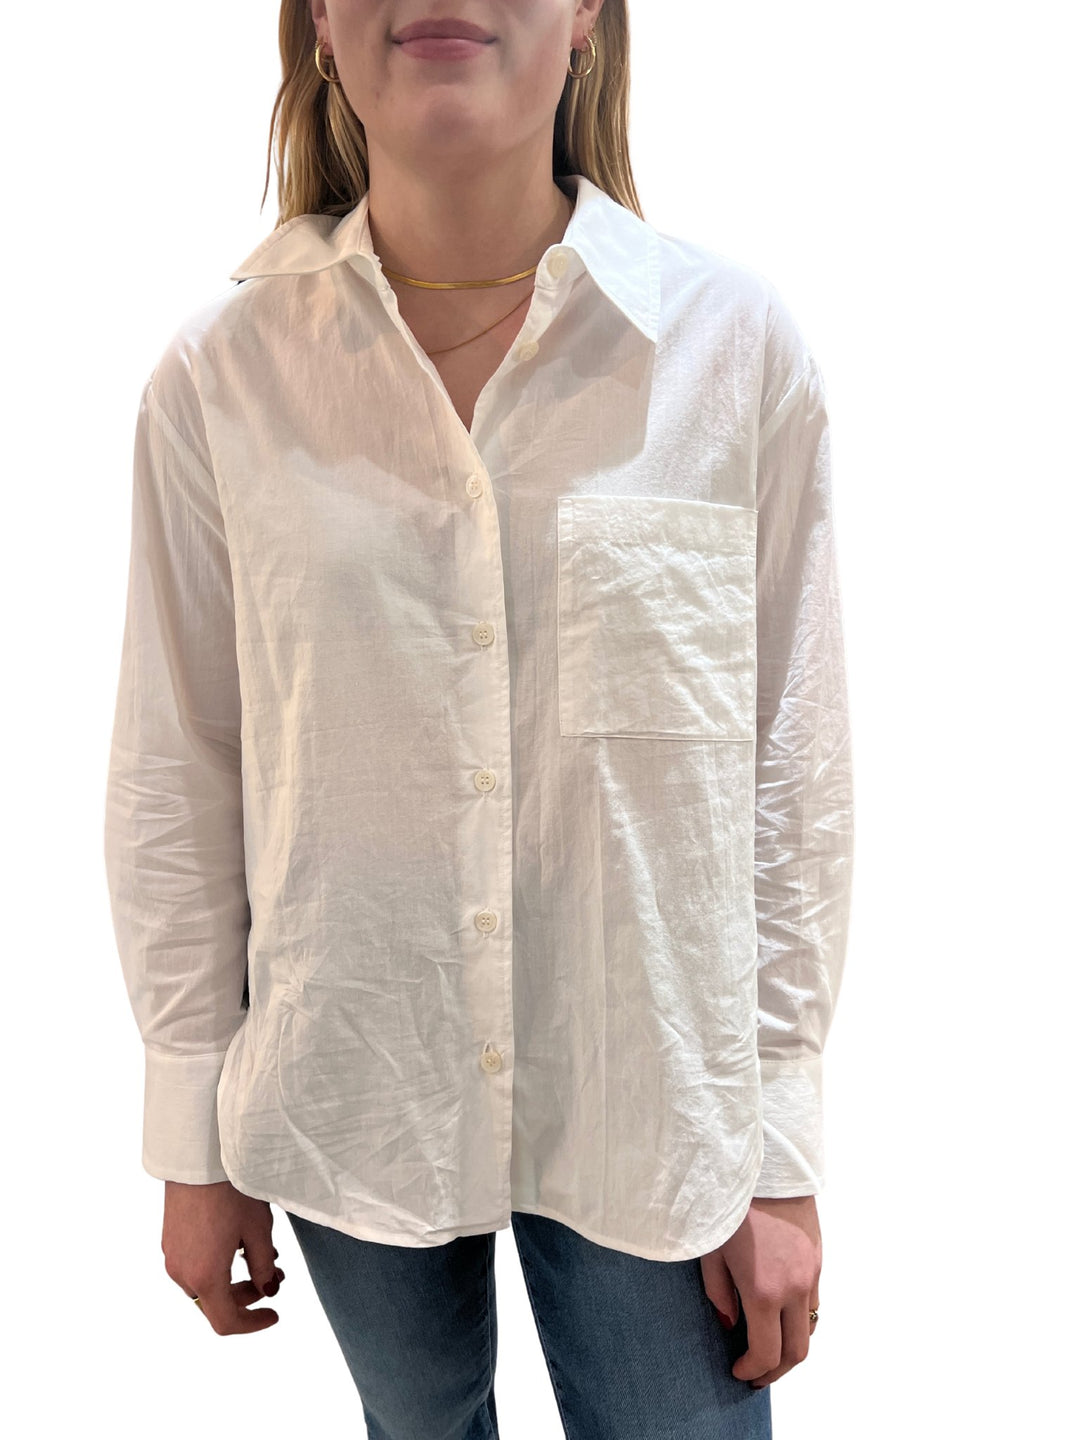 J. Society Button Up Long Sleeve Top - Capri by Sunset & Co.